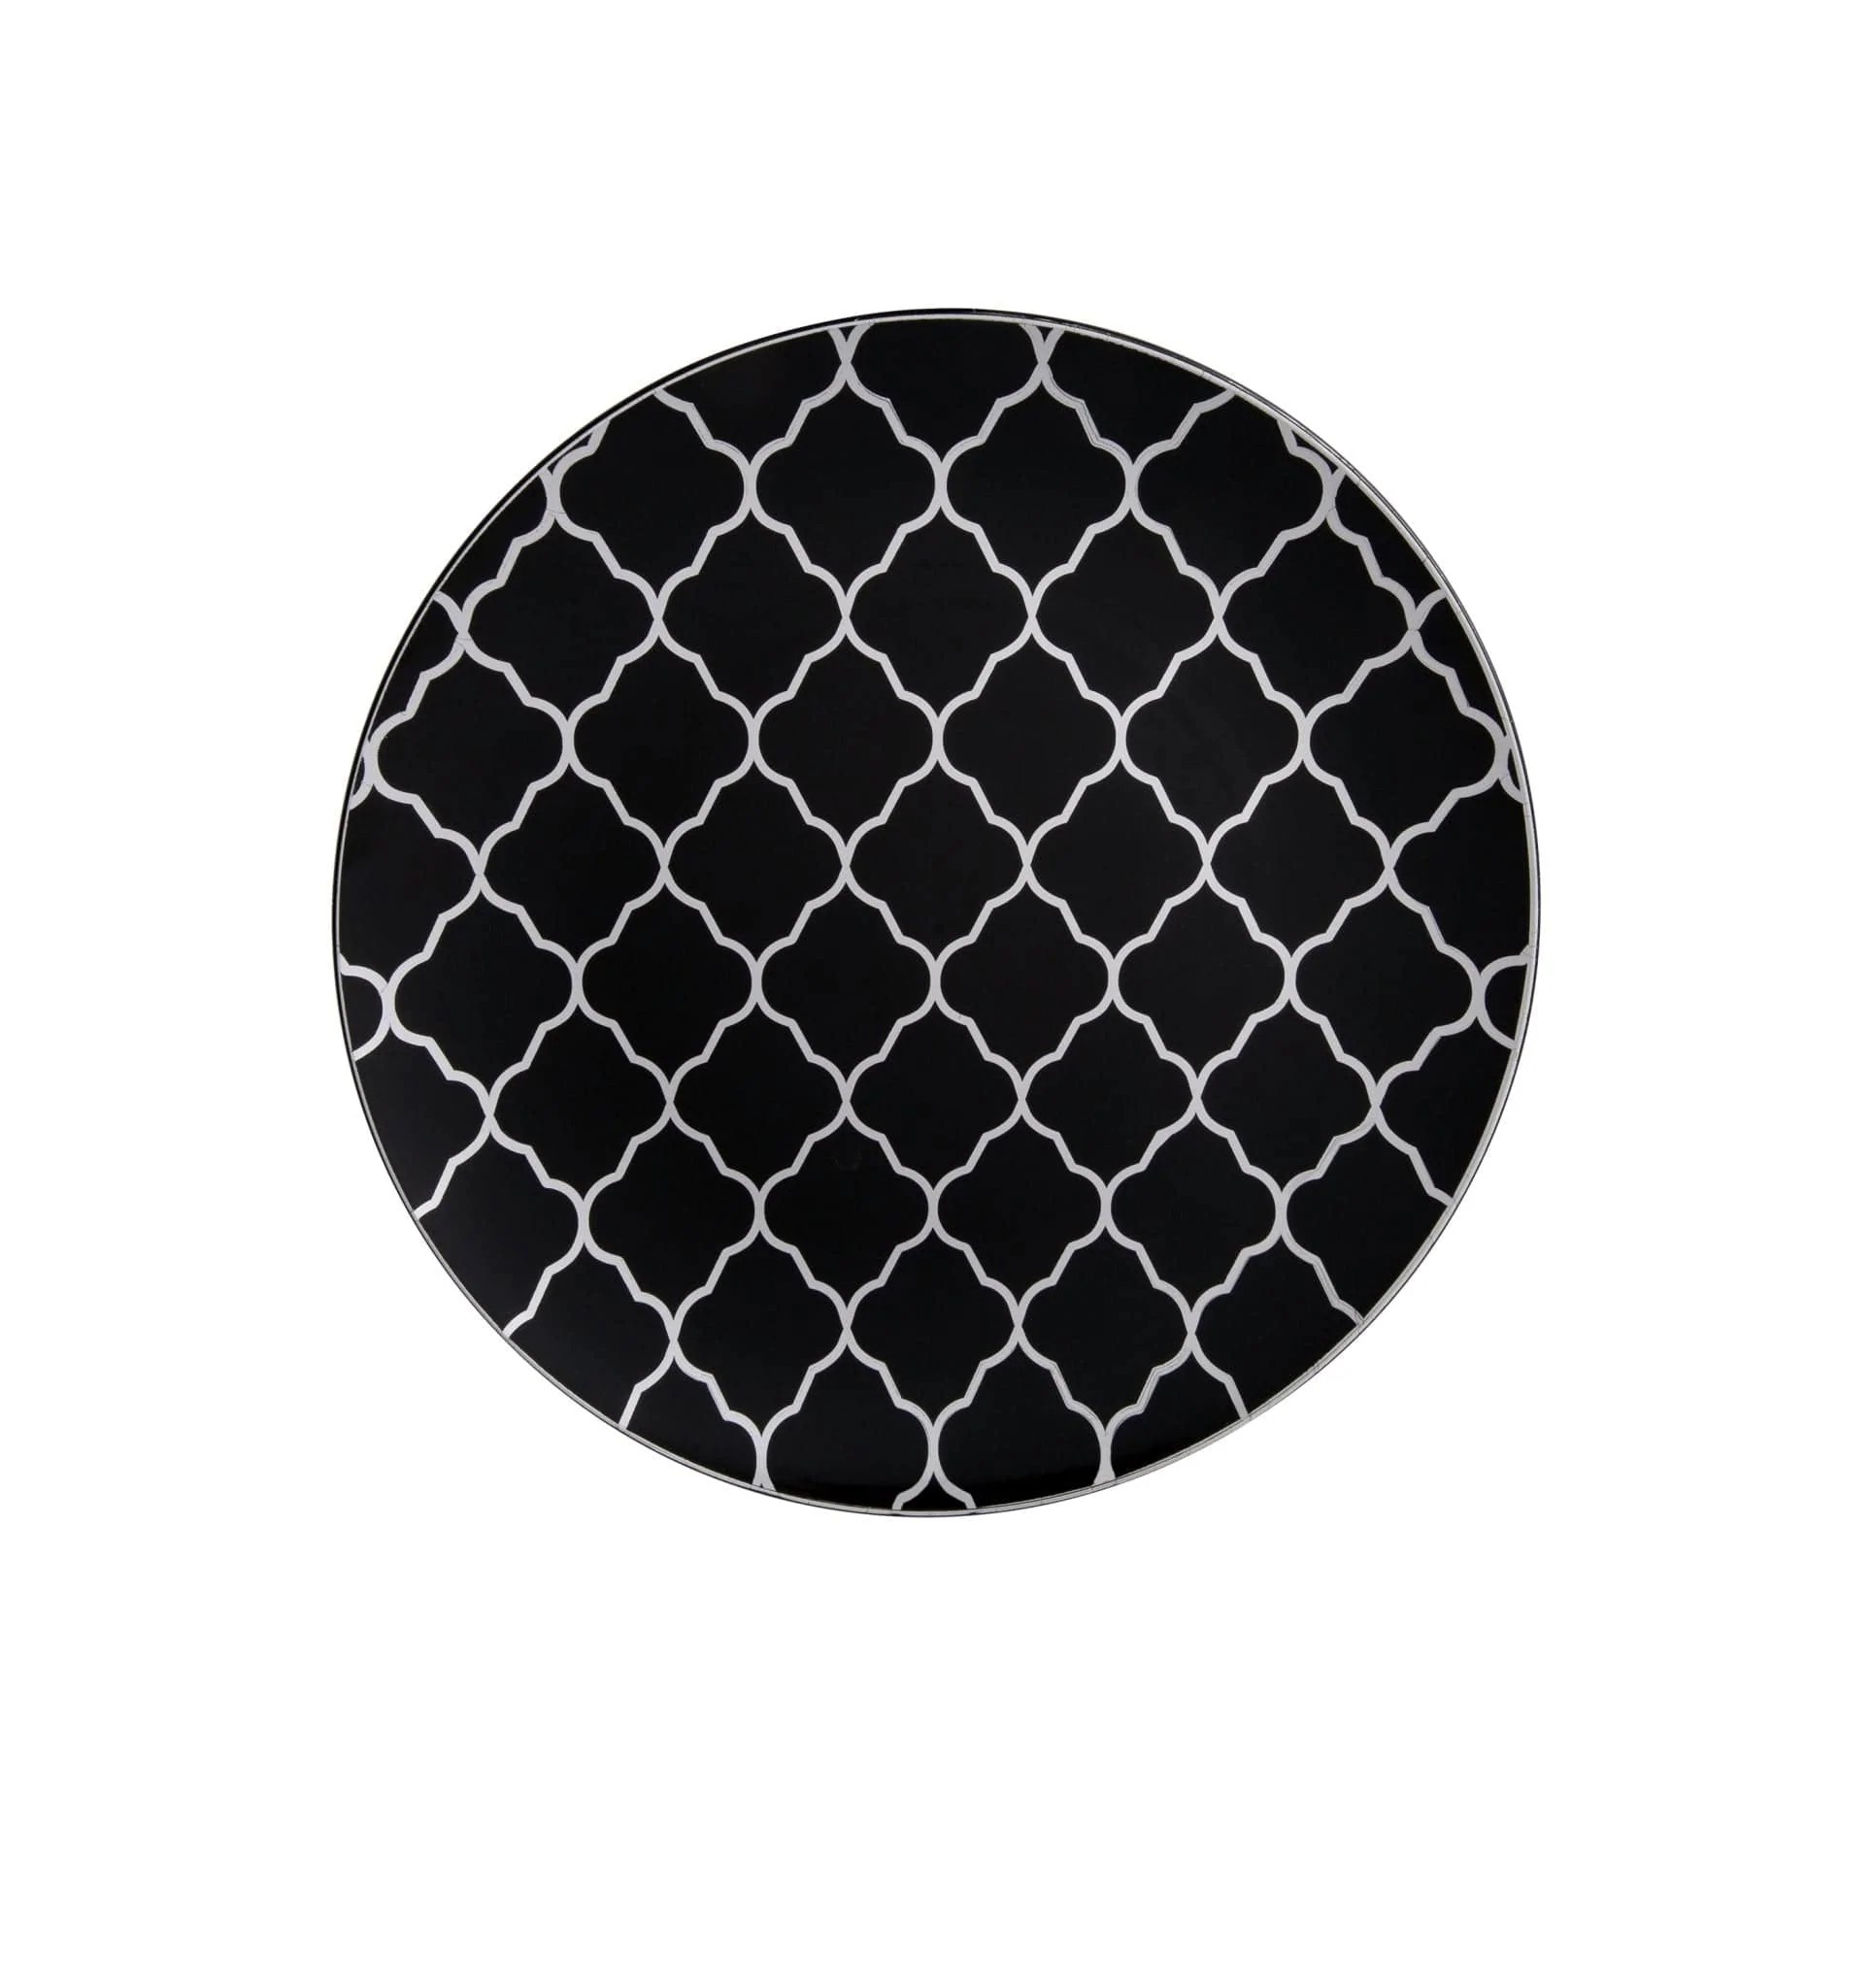 Luxe Party Black with Silver Lattice Pattern Plastic Dinner Plate 10.25